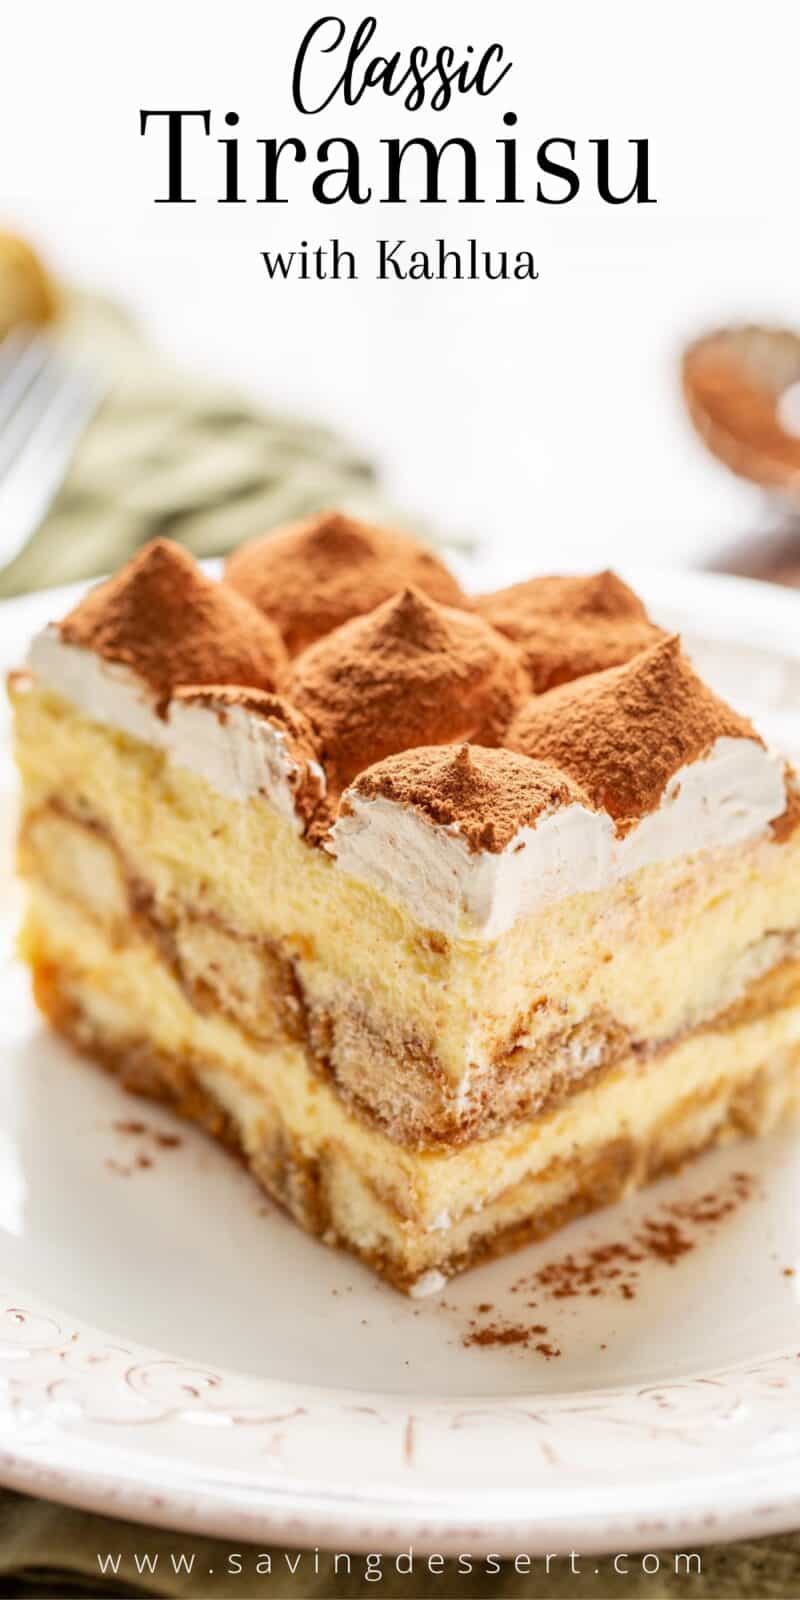 A side view of a slice of tiramisu dusted with cocoa powder on top